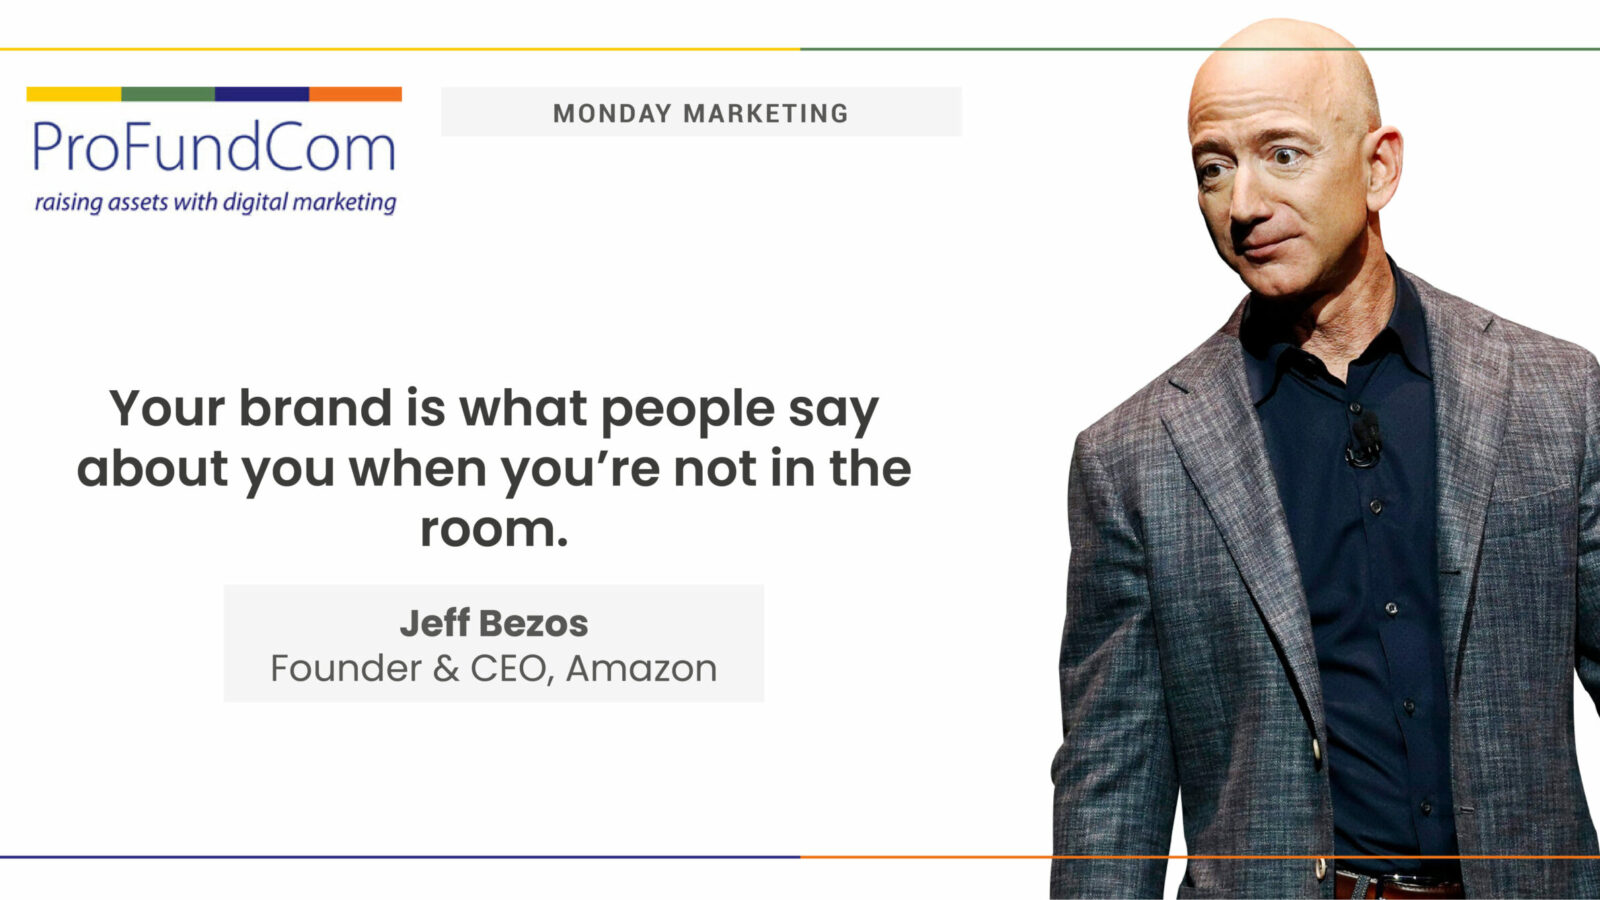 “Your brand is what people say about you when you’re not in the room.” — Jeff Bezos, Founder & CEO, Amazon